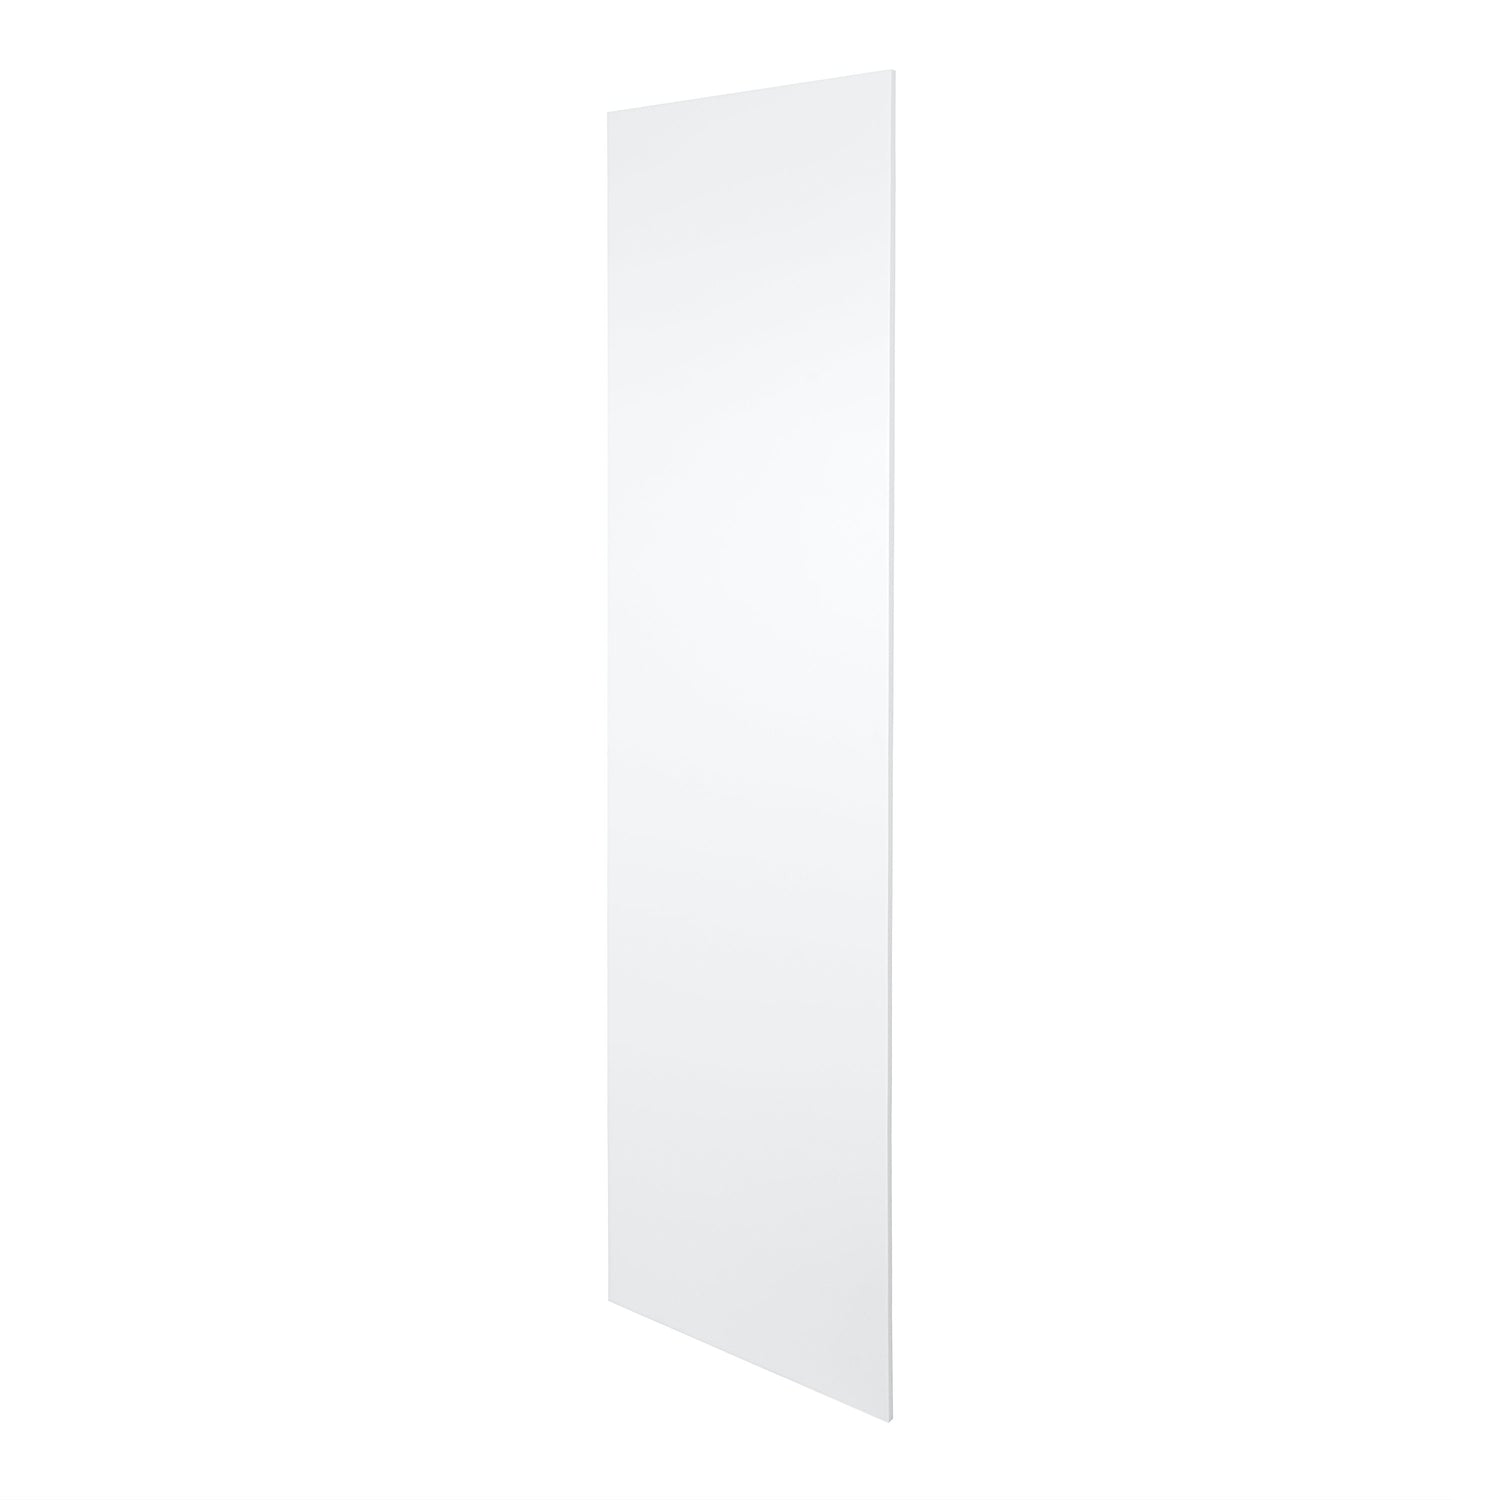 White Shaker Style Pantry Kitchen Cabinet End Panel (24 in W x 0.75 in D x 96 in H) -  Pro-Edge HD